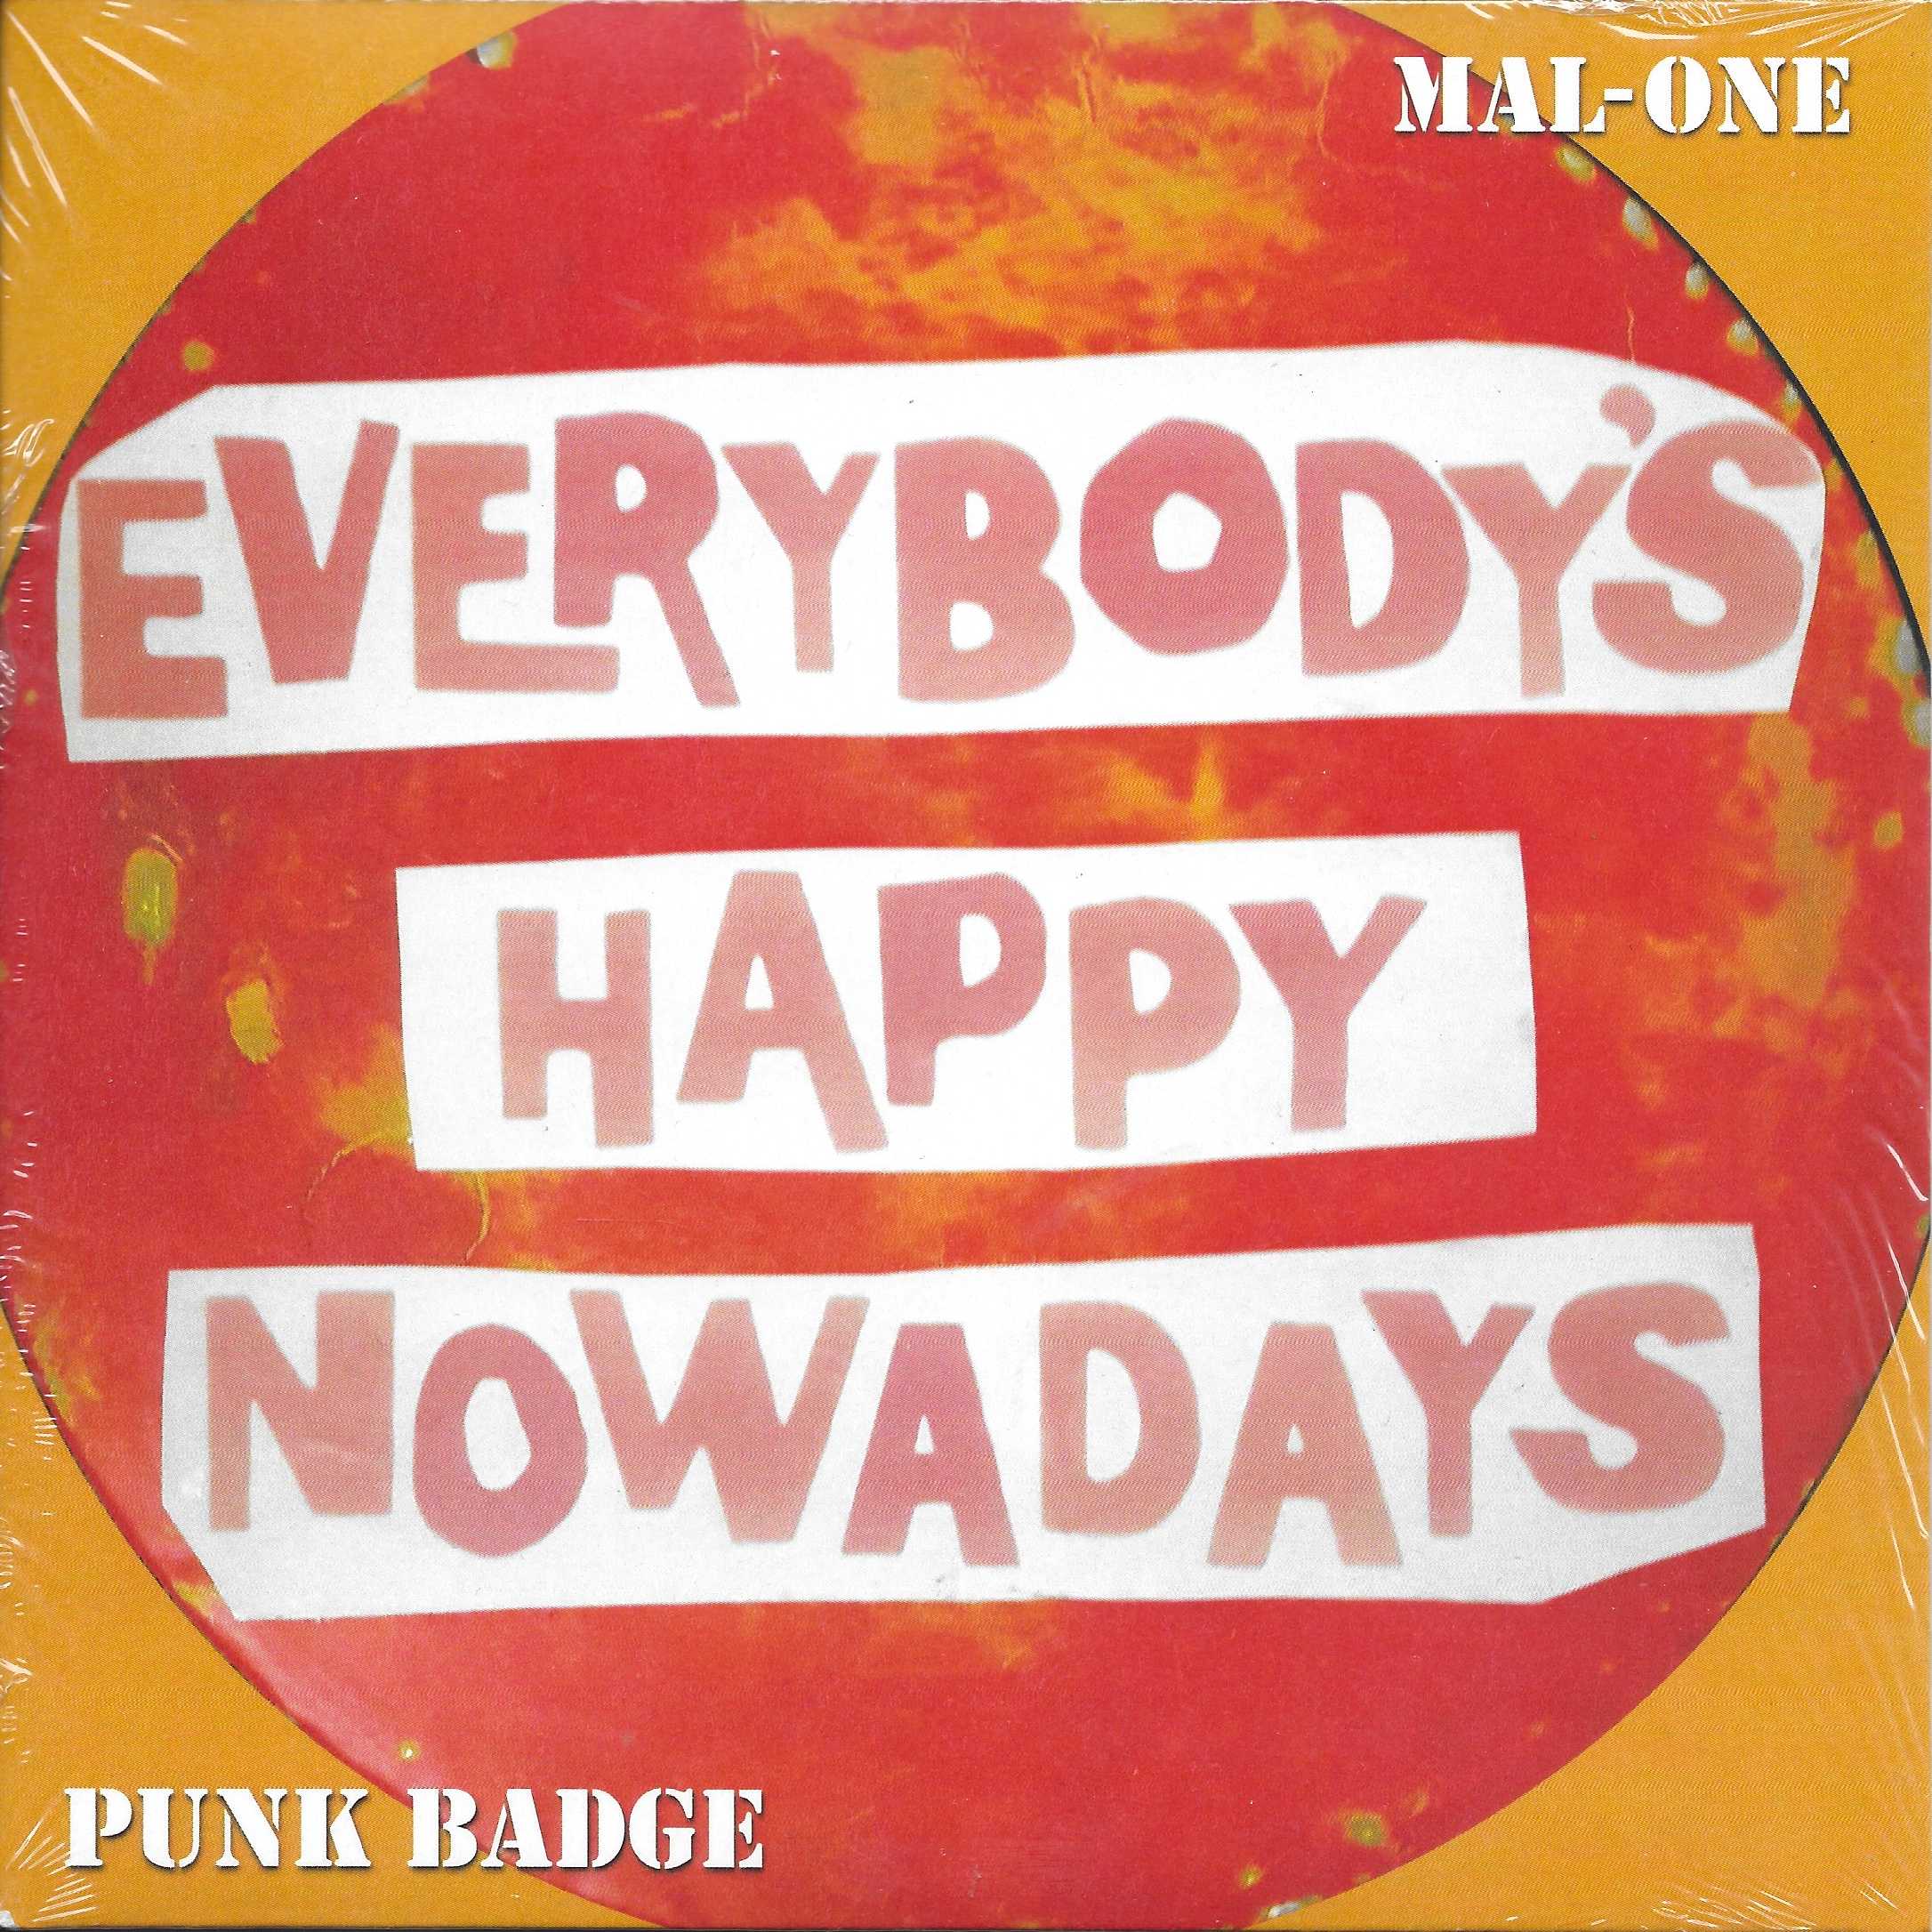 Picture of MAL-ONE-004 1 Everybody's happy nowadays - Record Store Day 2021 by artist Mal-One 